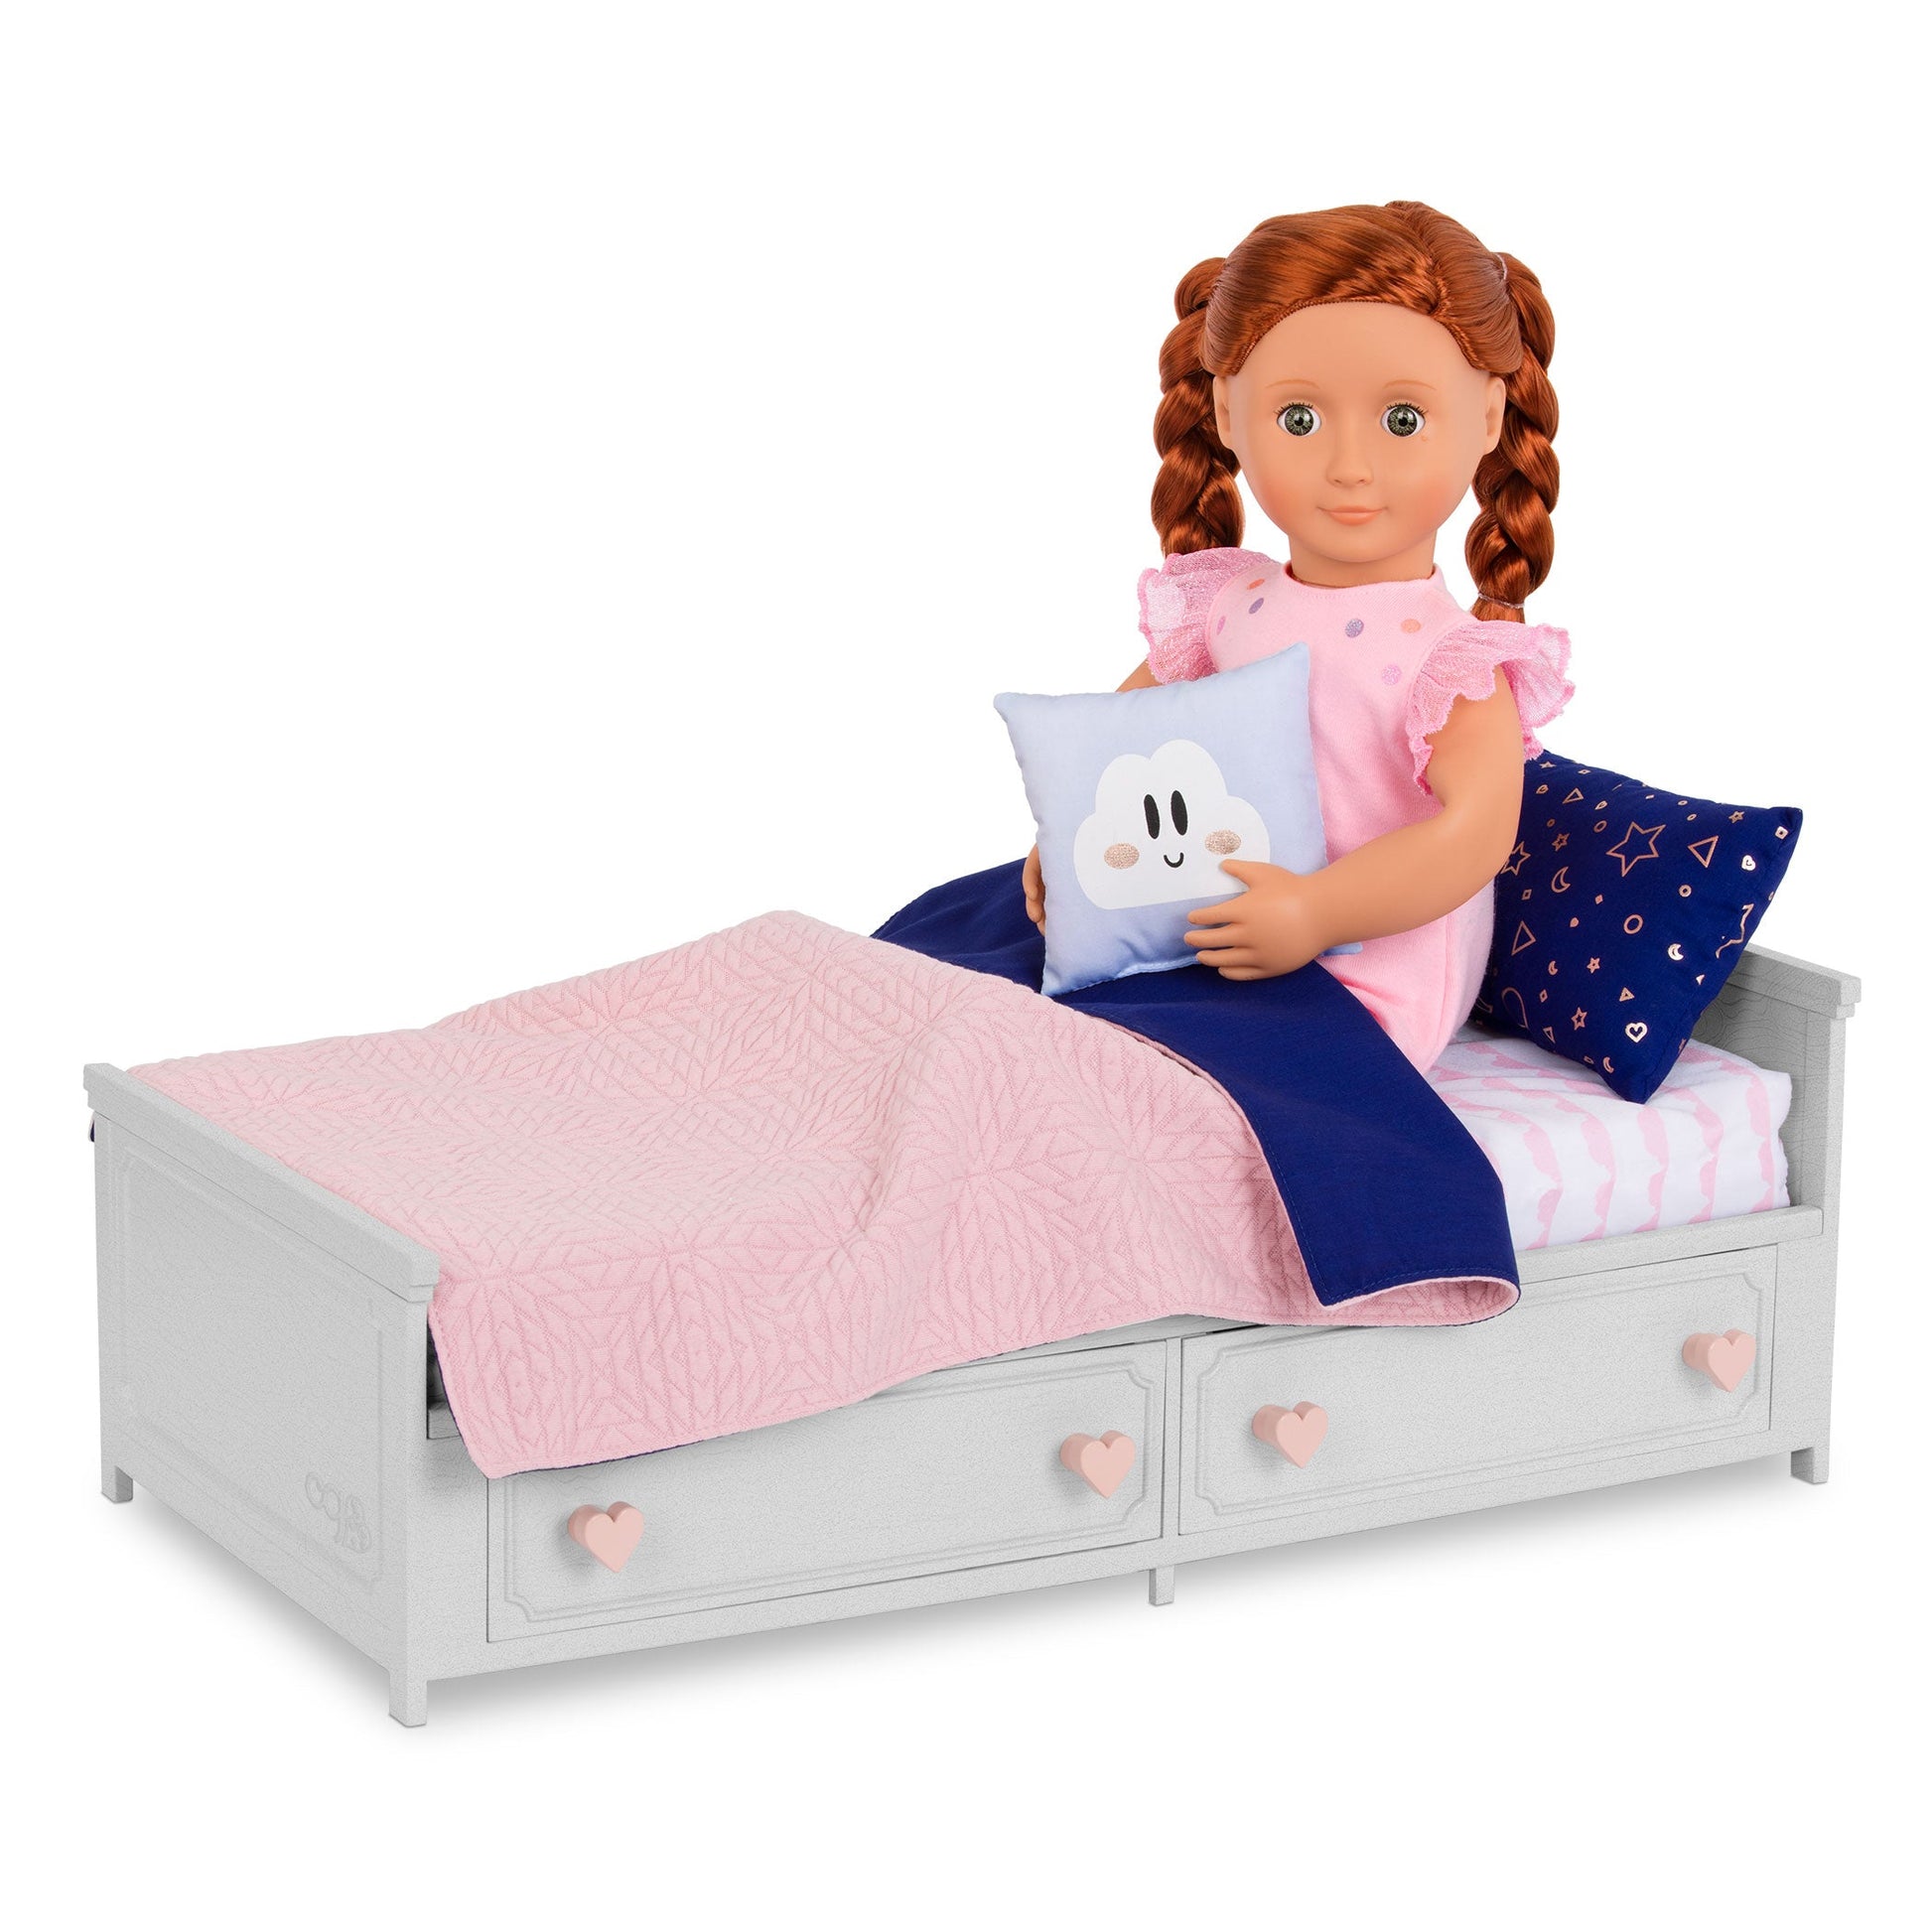 Our Generation Accessory - Starry Slumbers Platform Bed The Toy Wagon